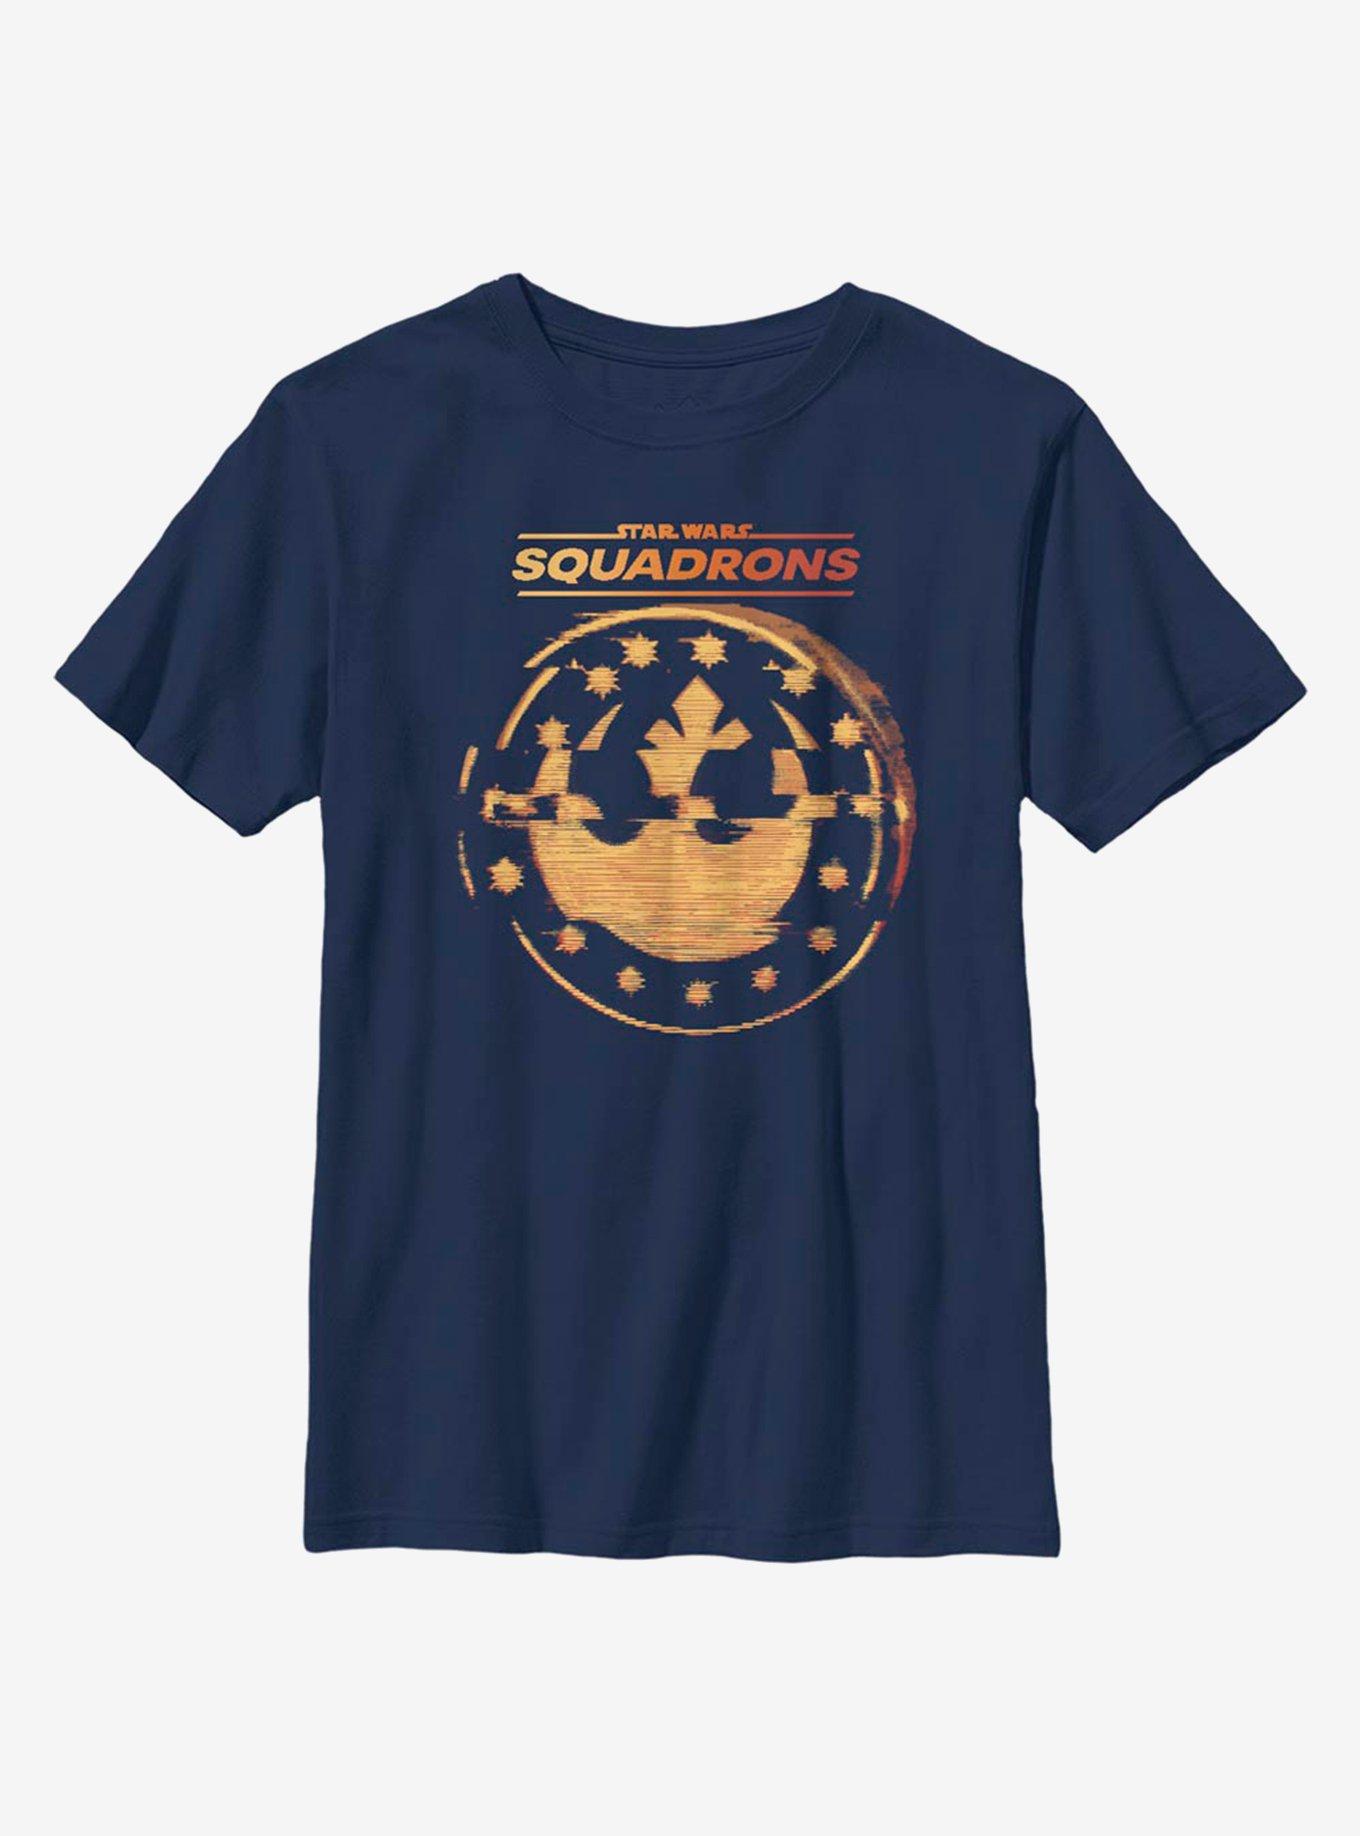 Star Wars Squadrons Glitched Logo Youth T-Shirt, , hi-res